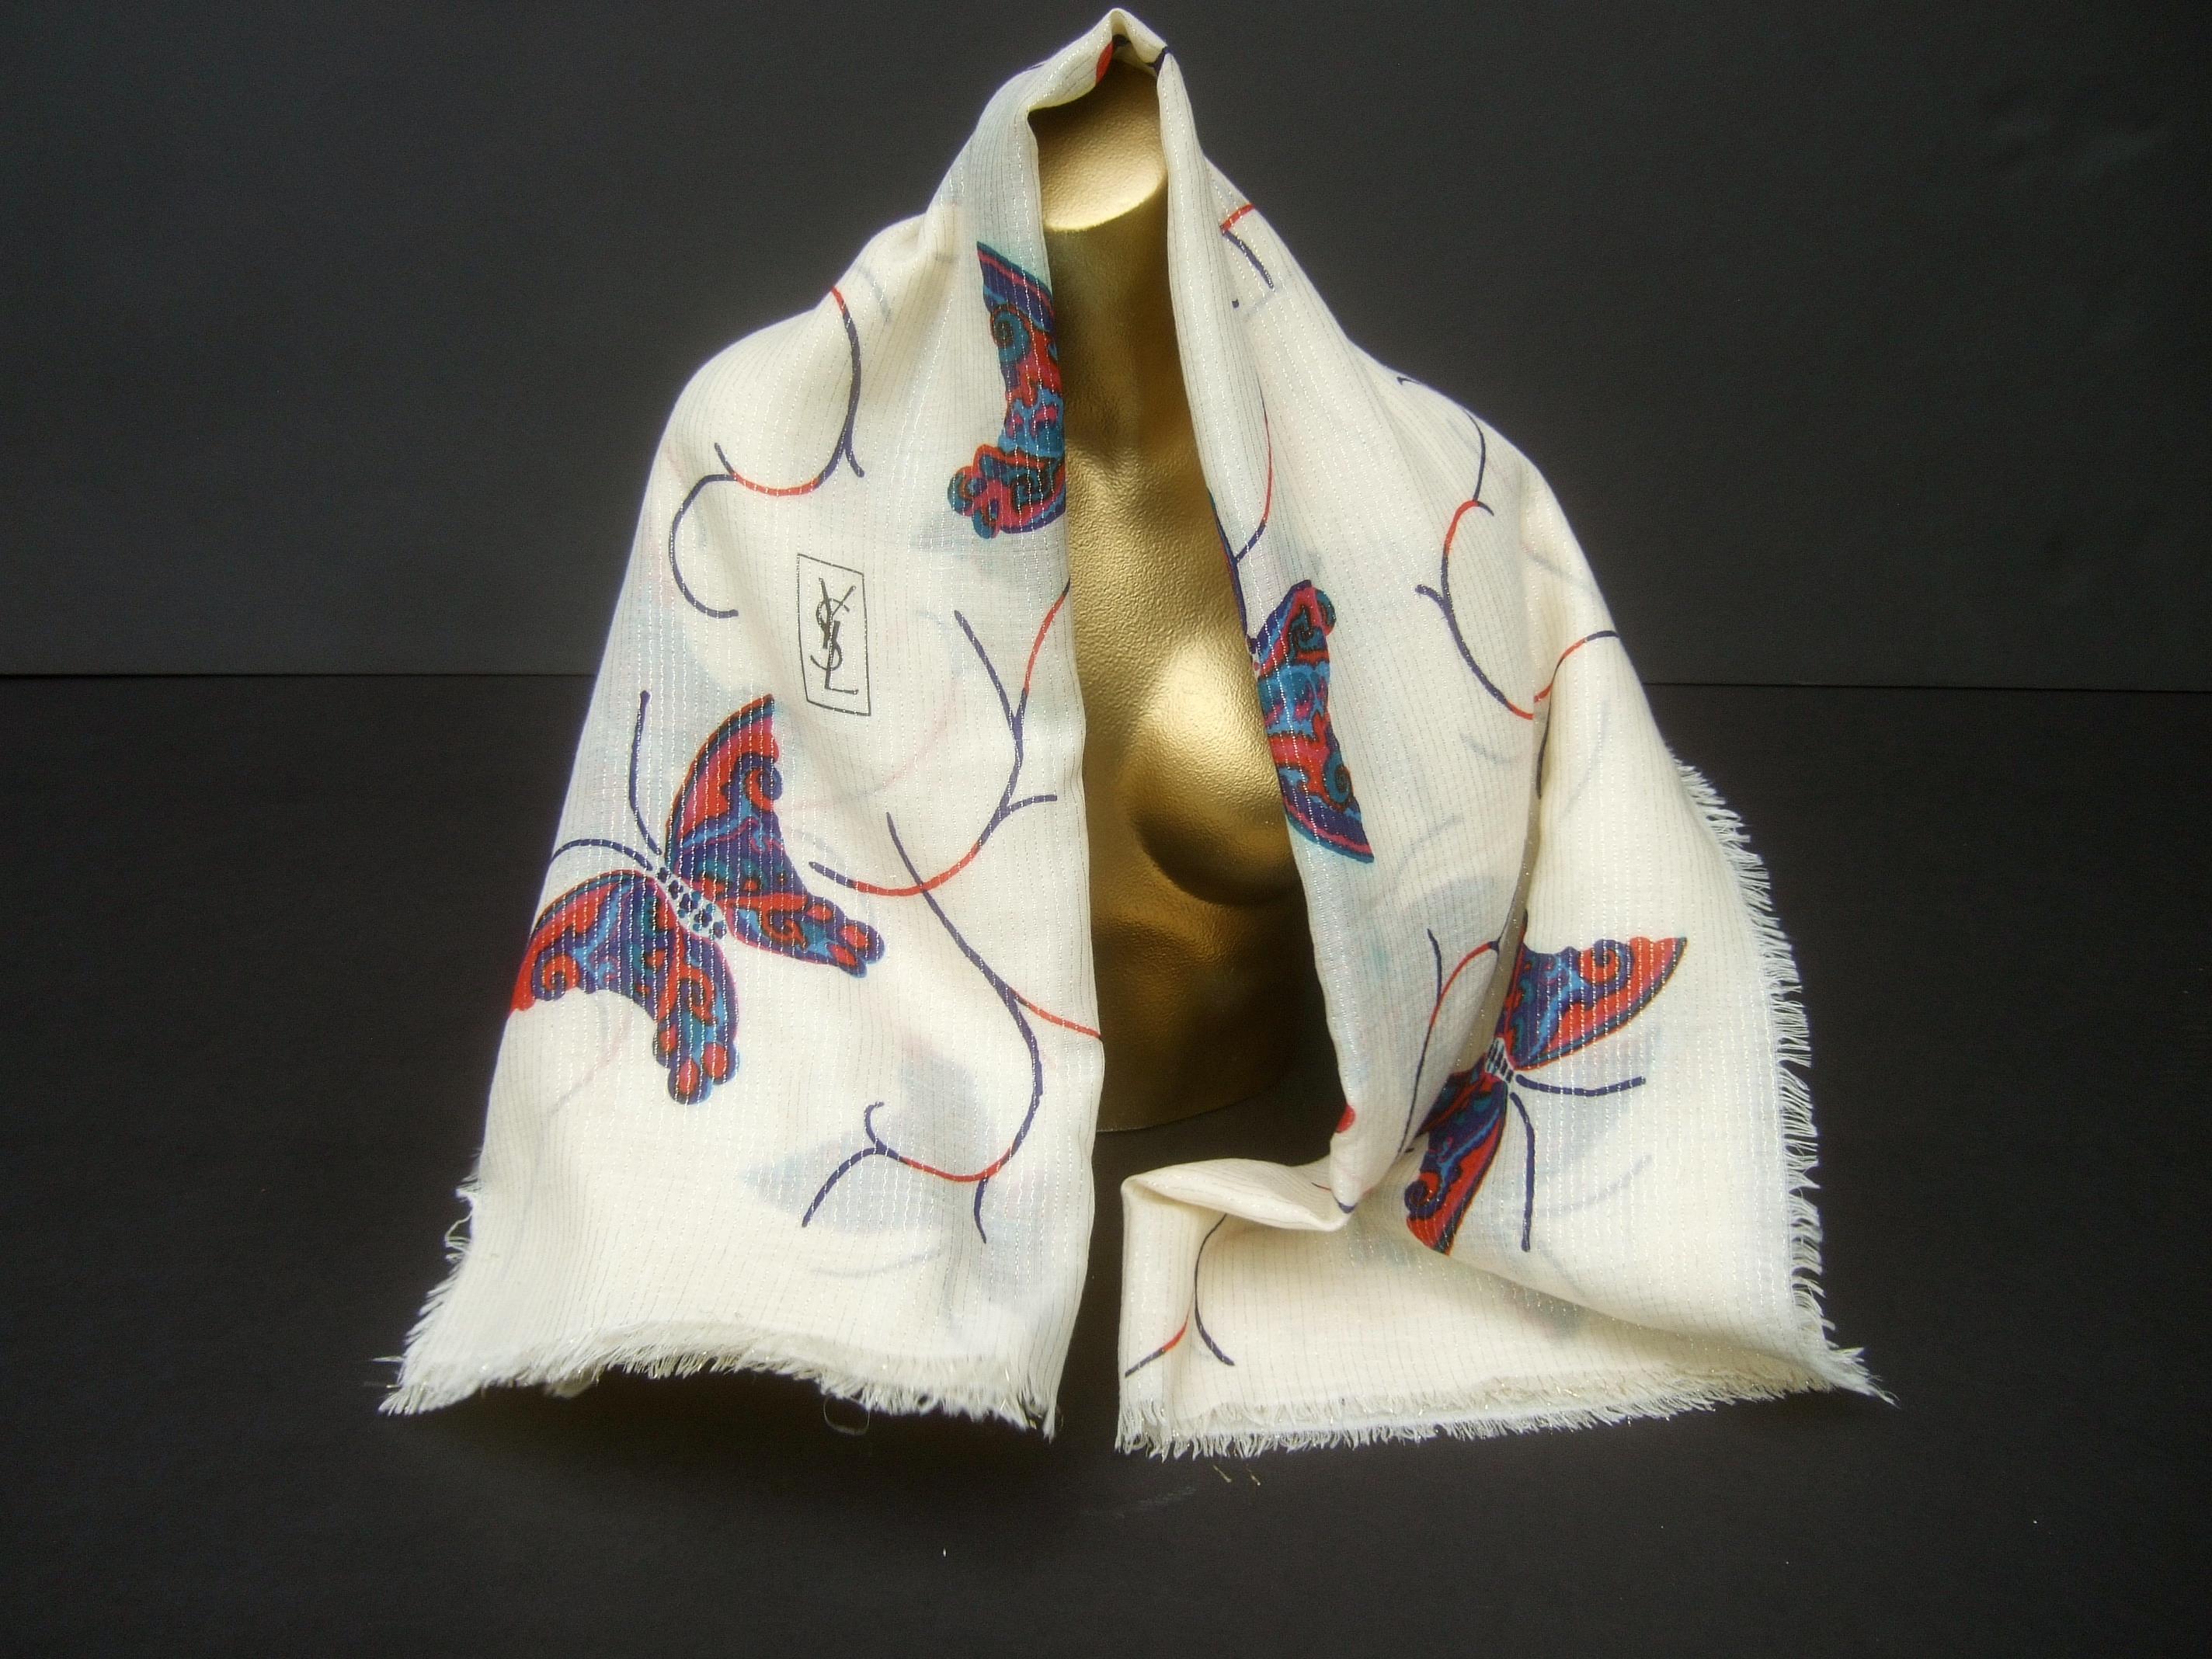 Yves Saint Laurent Large Butterfly Print Scarf - Shawl Wrap 52 x 53 Circa 1970s  4